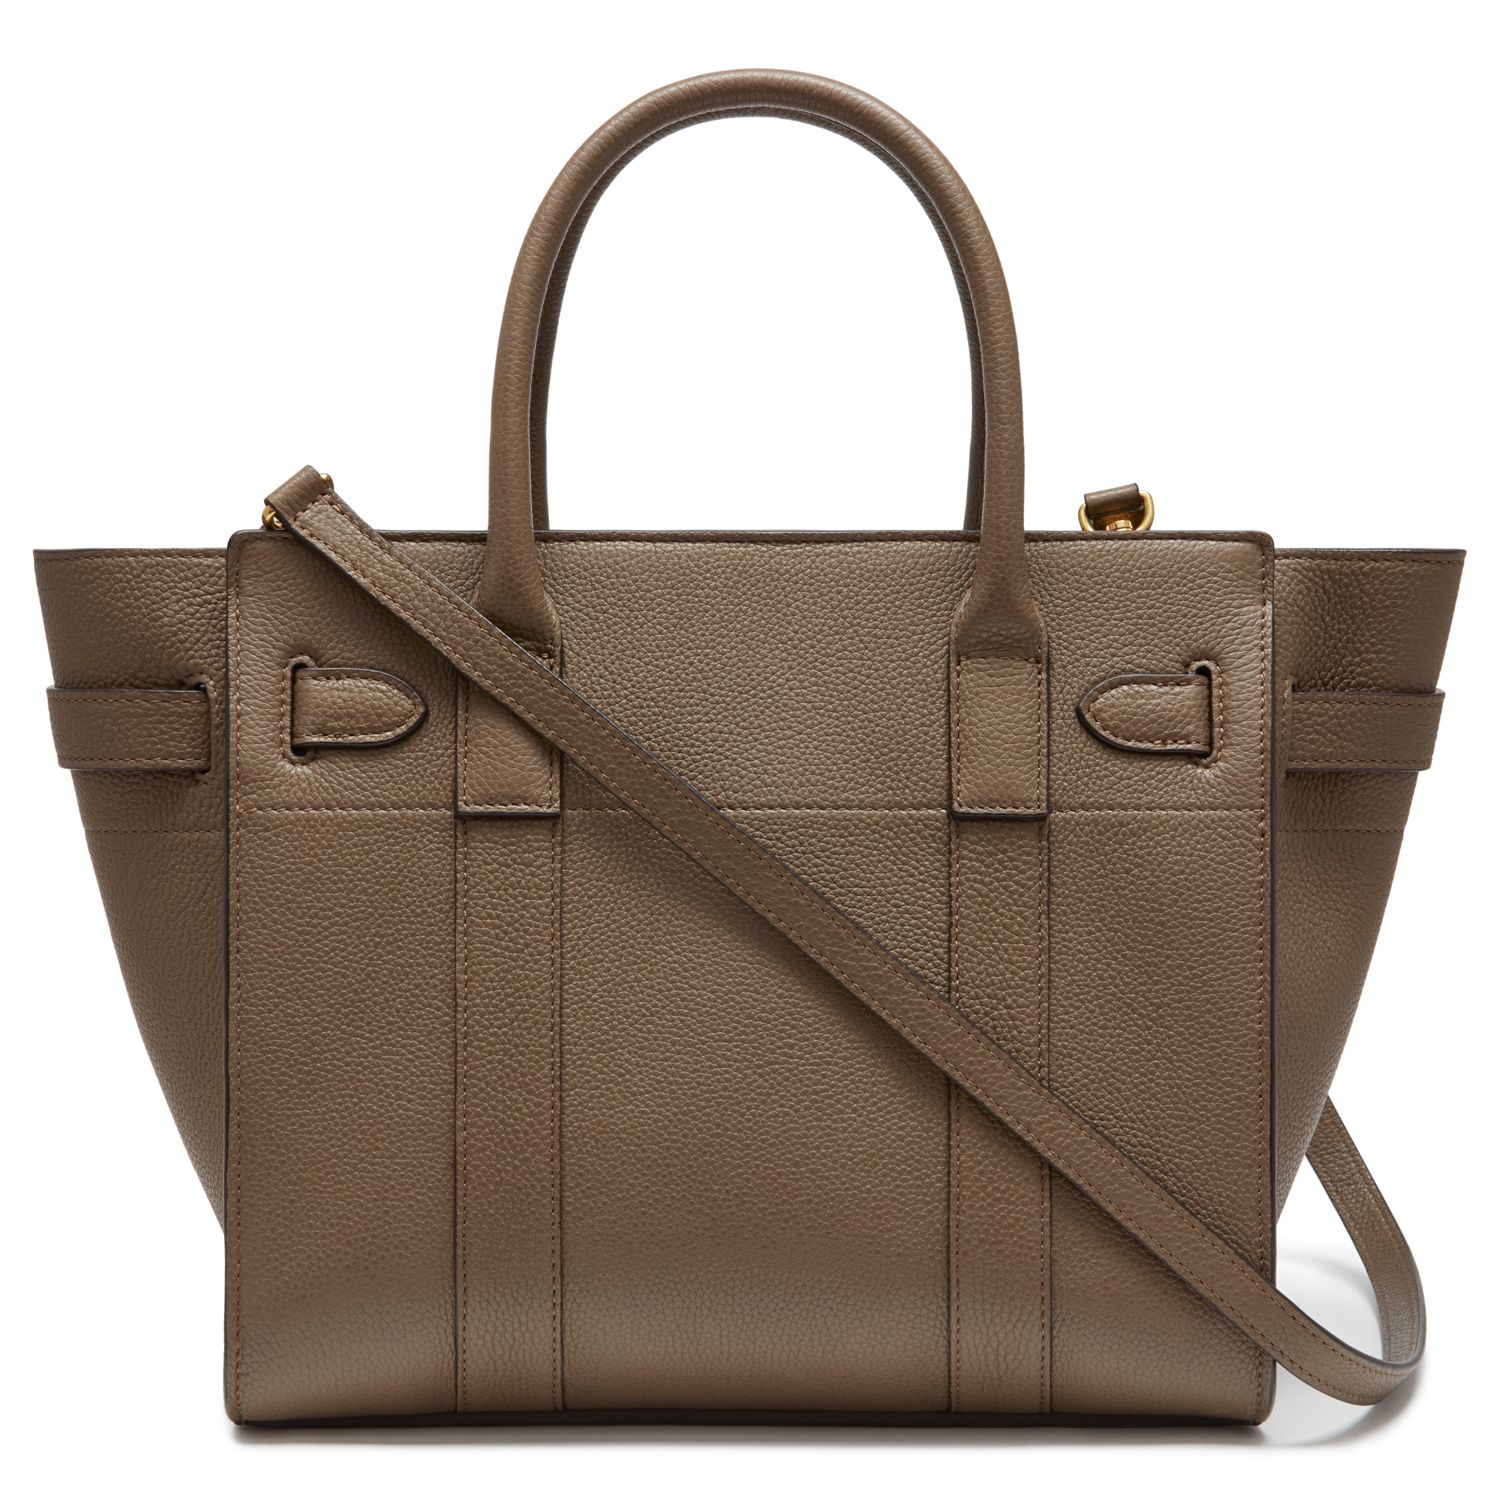 Mulberry Bayswater Small Classic Grain Leather Zipped Bag at John Lewis